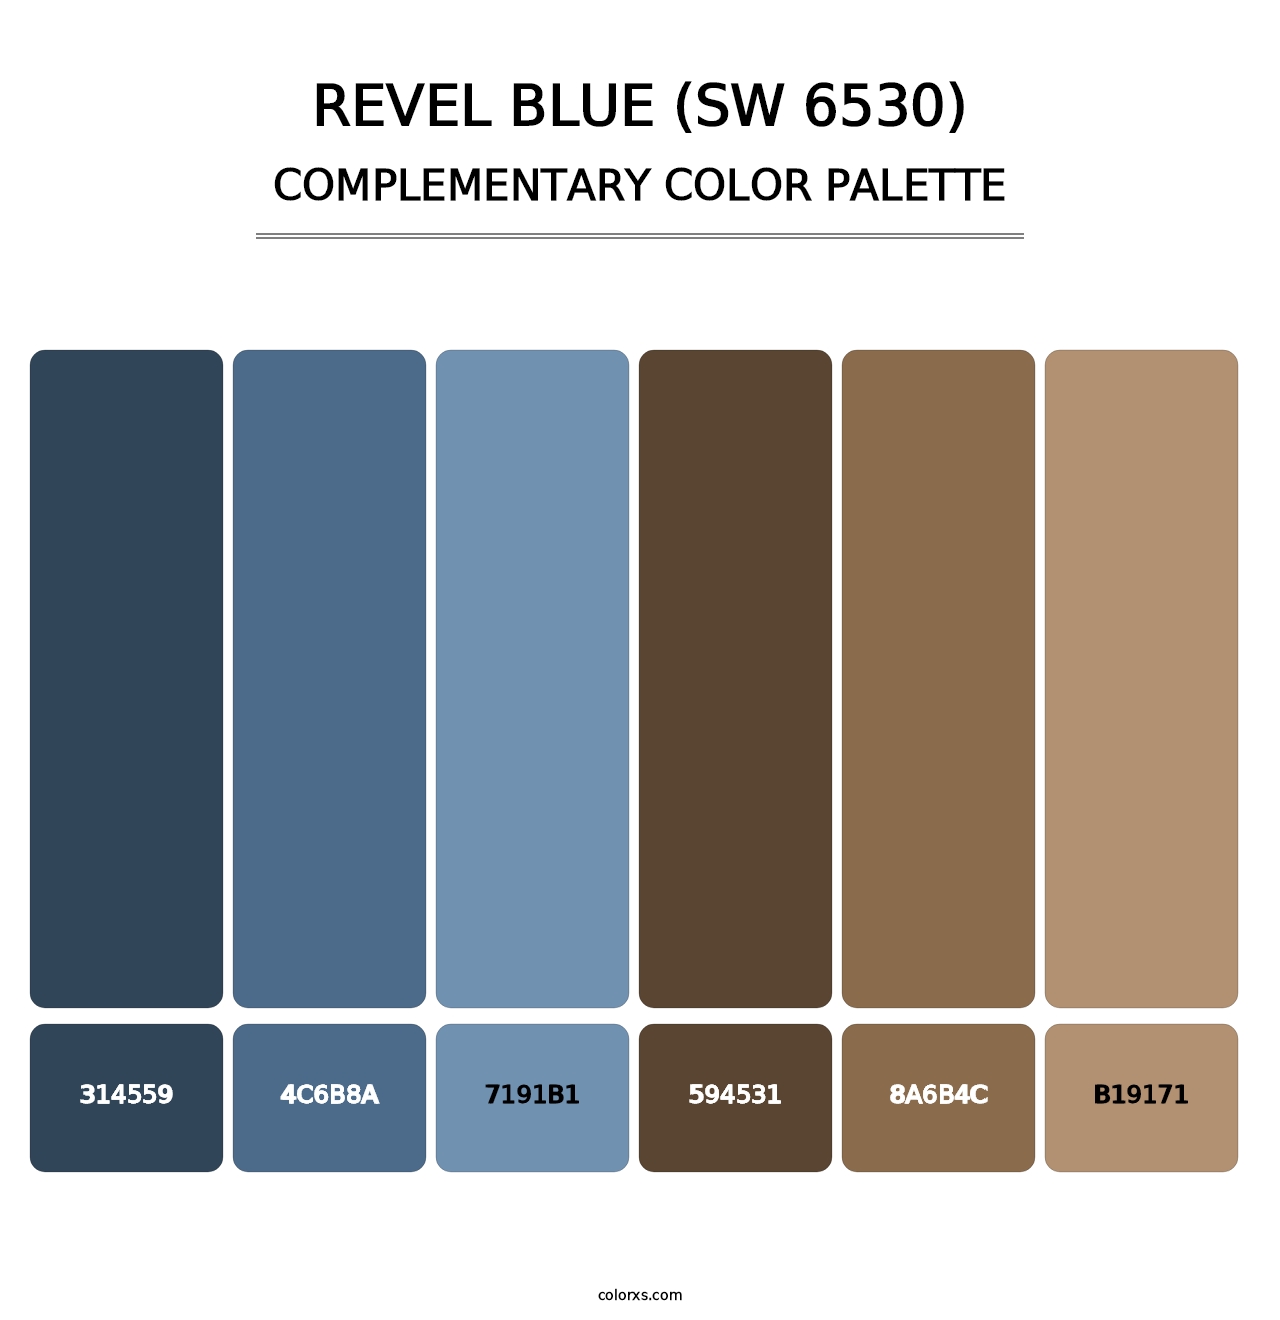 Revel Blue (SW 6530) - Complementary Color Palette